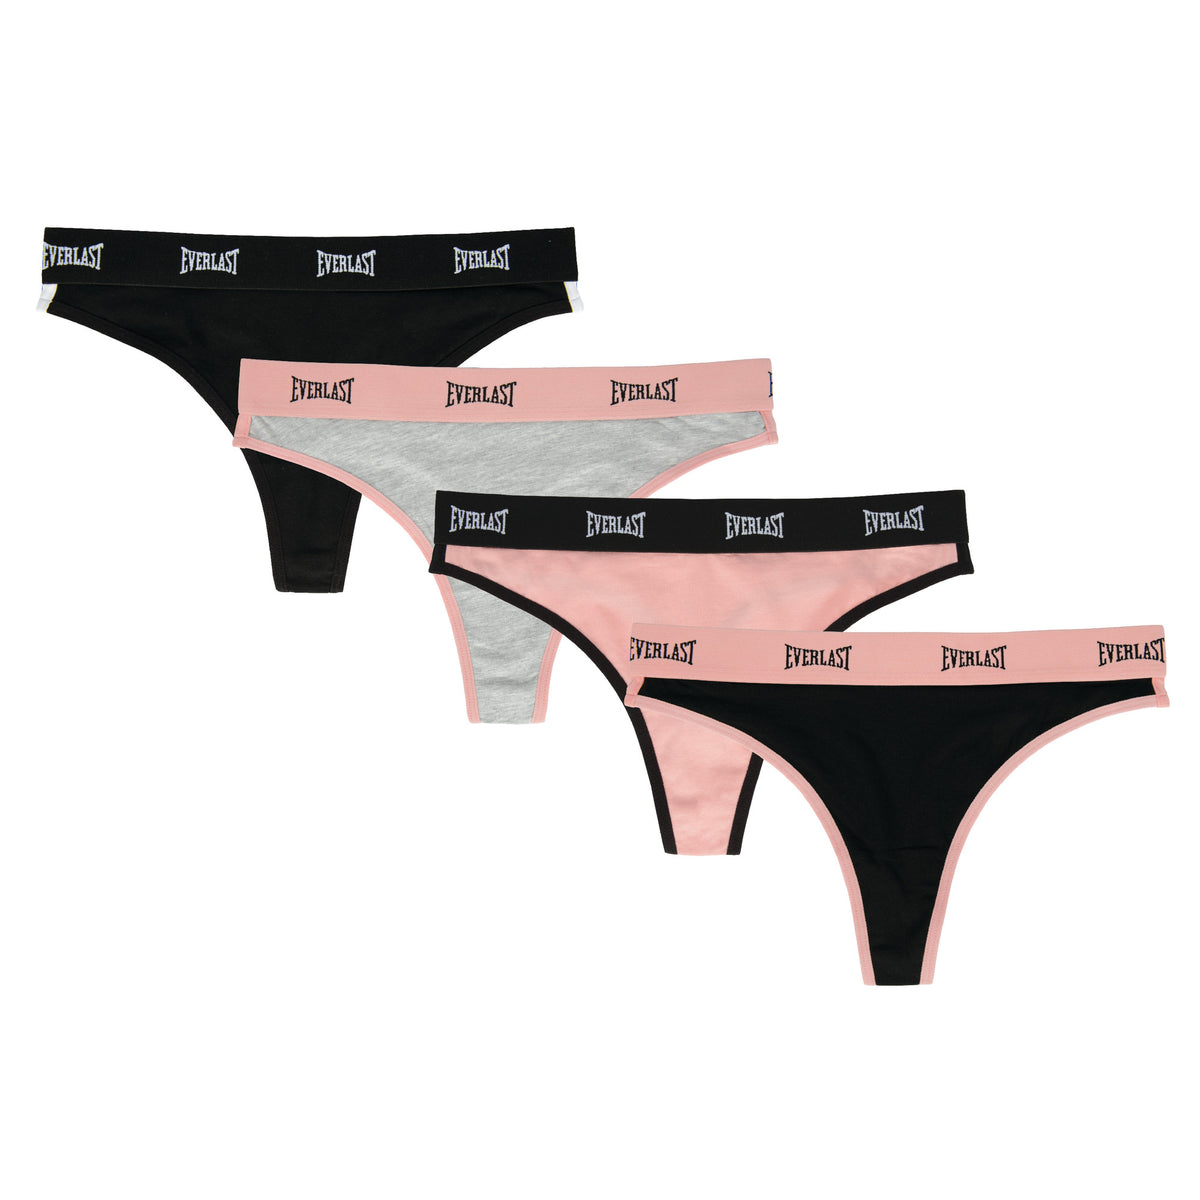 Everlast womens Everlast Cotton Spandex Underwear Comfortable 4 Pack  (Regular size) Thong Panties, COM A: Black, Grey, Blush, Black, Small US :  : Clothing, Shoes & Accessories